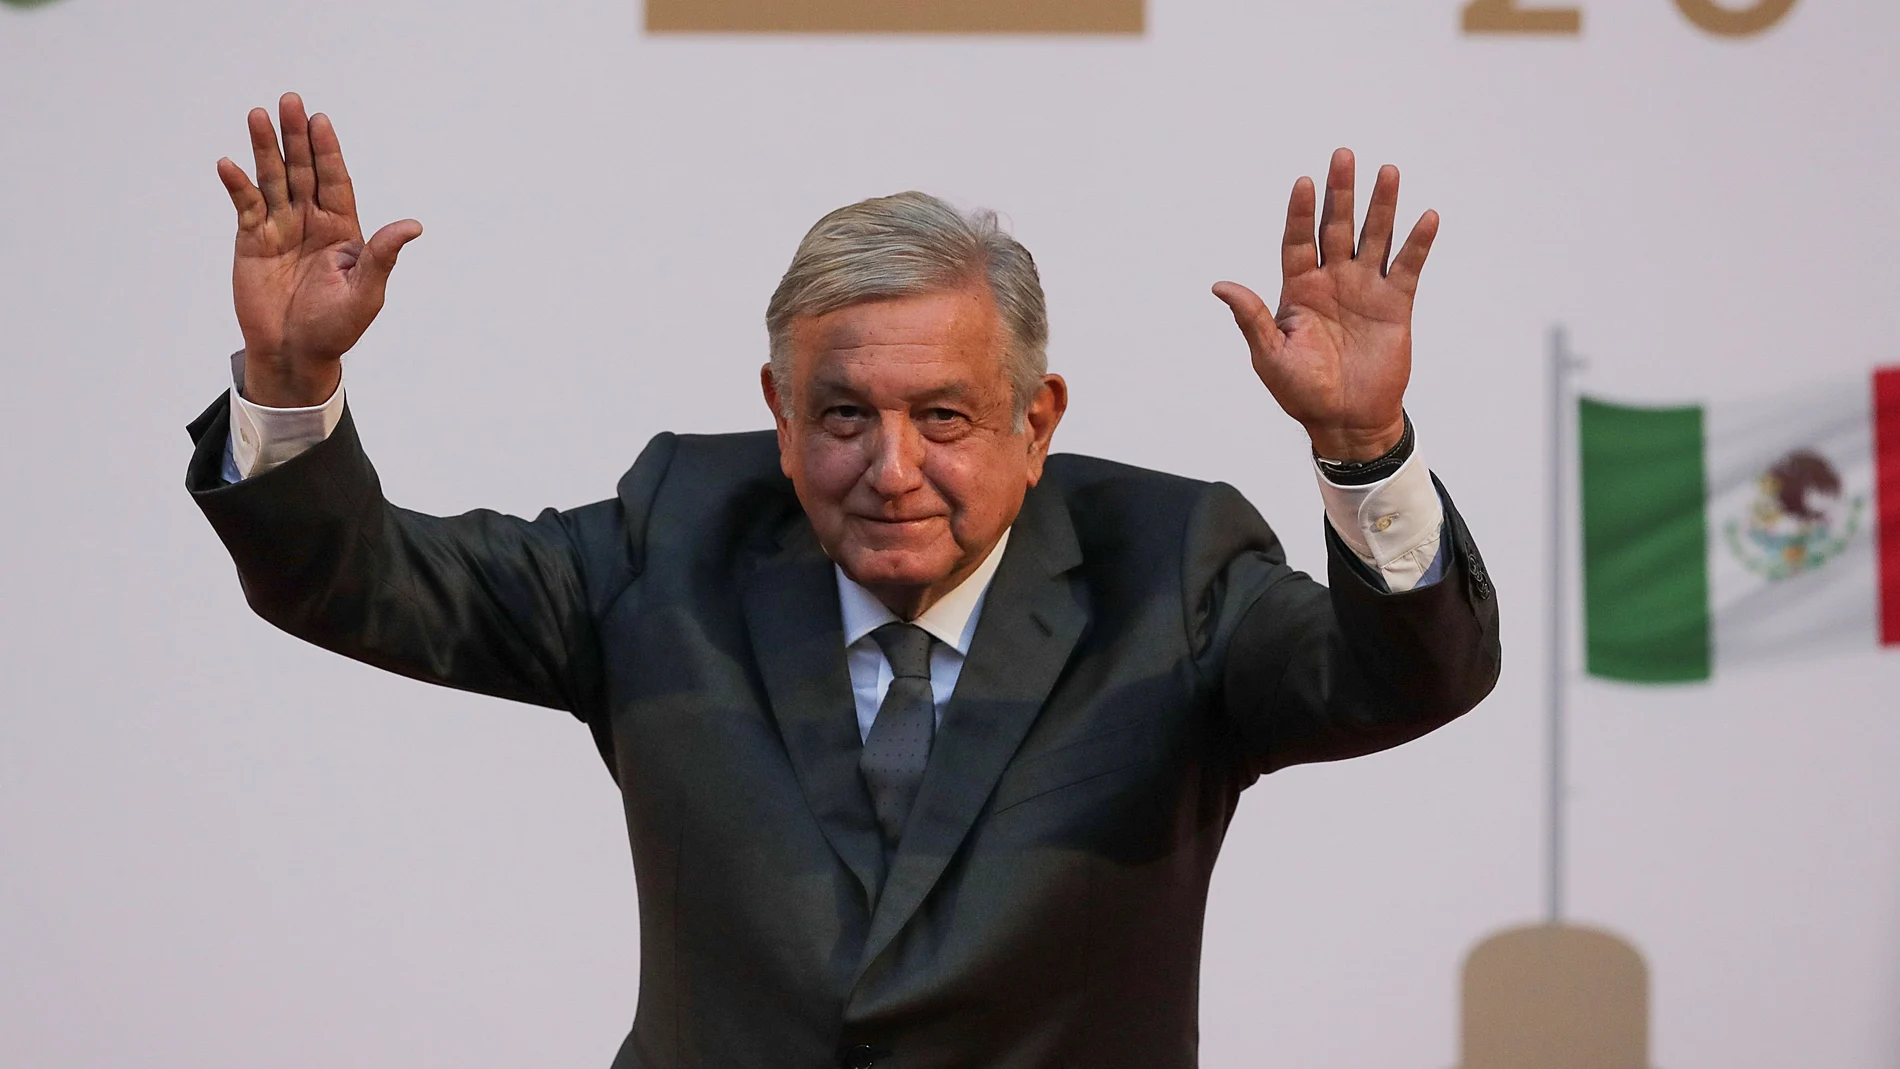 Mexico's President Andres Manuel Lopez Obrador waves after addressing to the nation on his second anniversary as the President of Mexico, at the National Palace in Mexico City, Mexico, December 1, 2020. REUTERS/Henry Romero